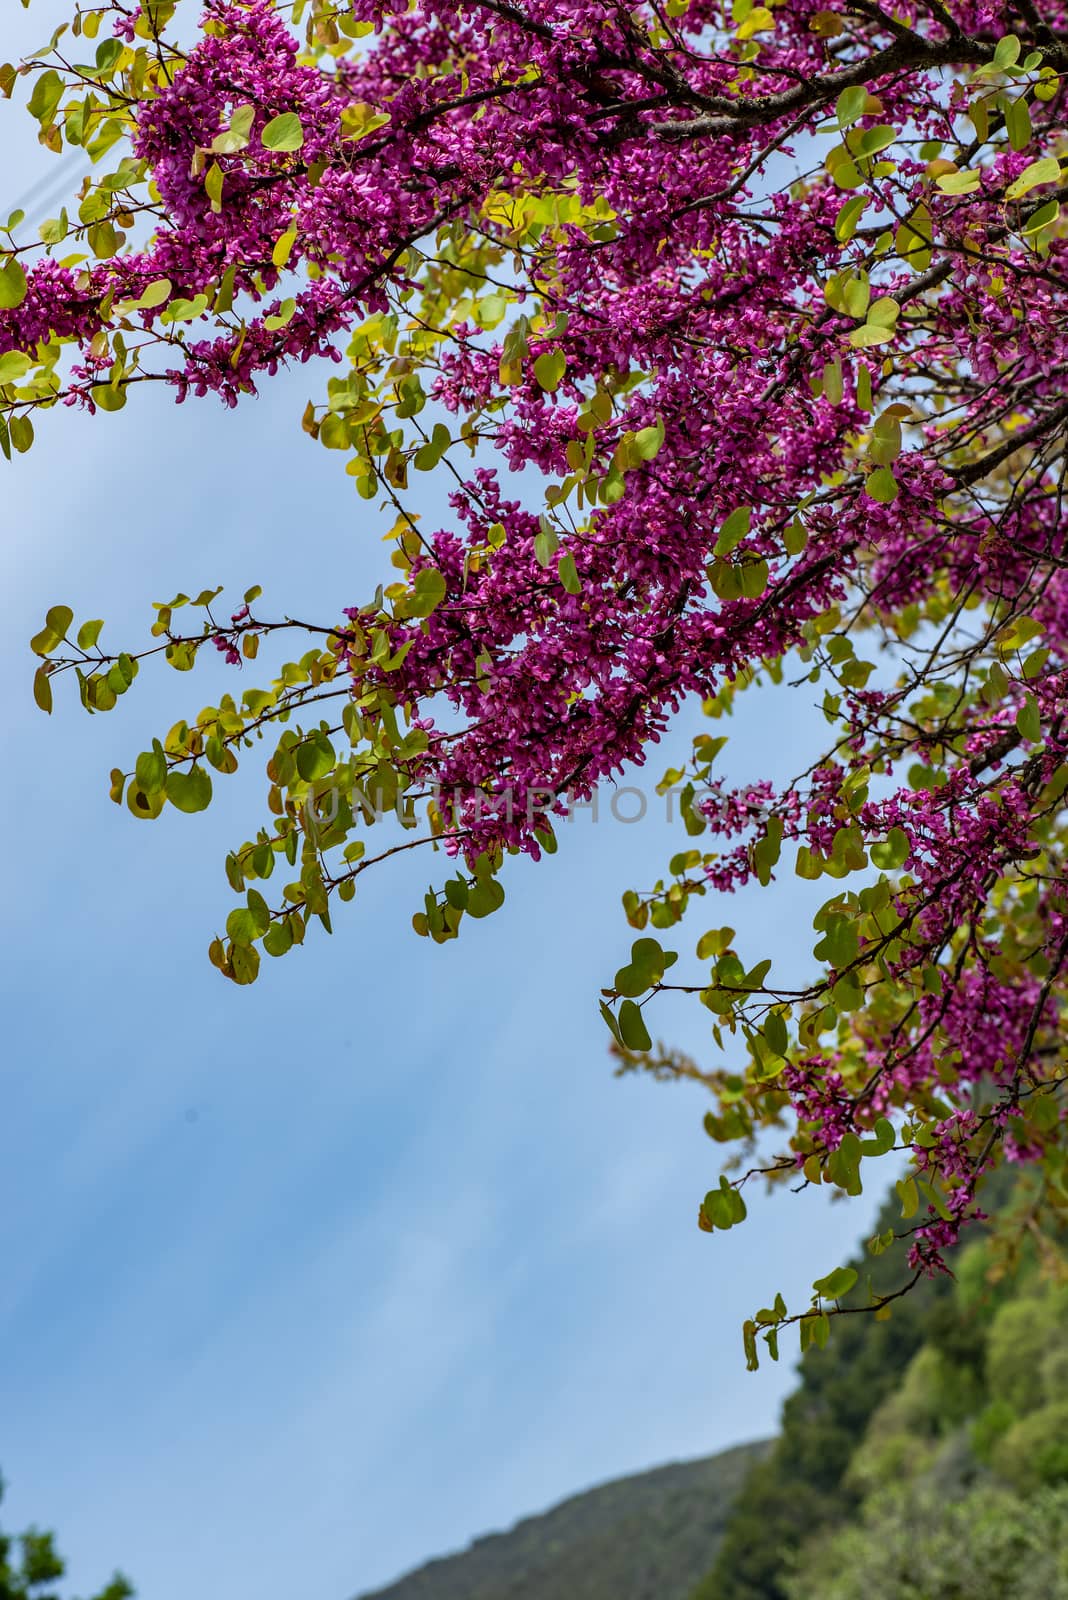 tree with purple leaves in summer in contrast with blue sky